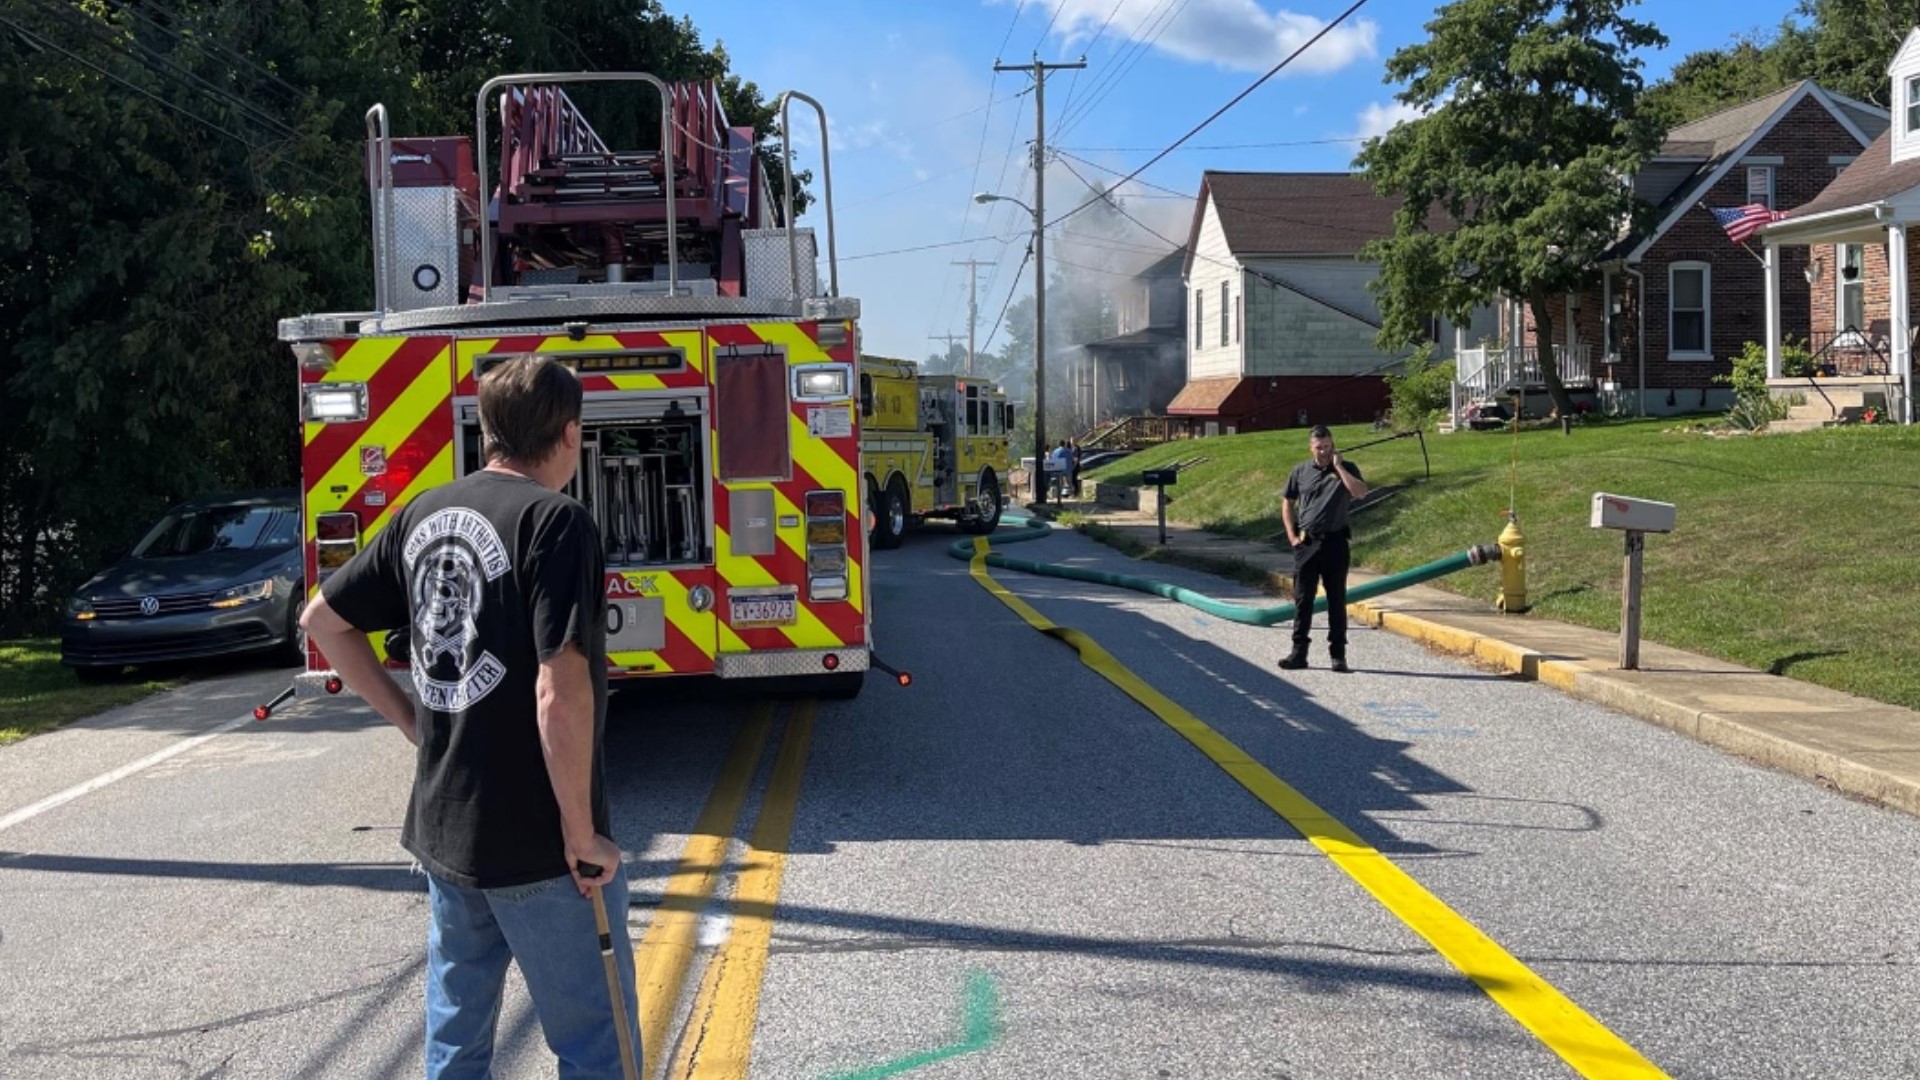 According to emergency dispatchers, the fire began around 10:20 a.m. in the first block of South Main Street in Loganville Borough.